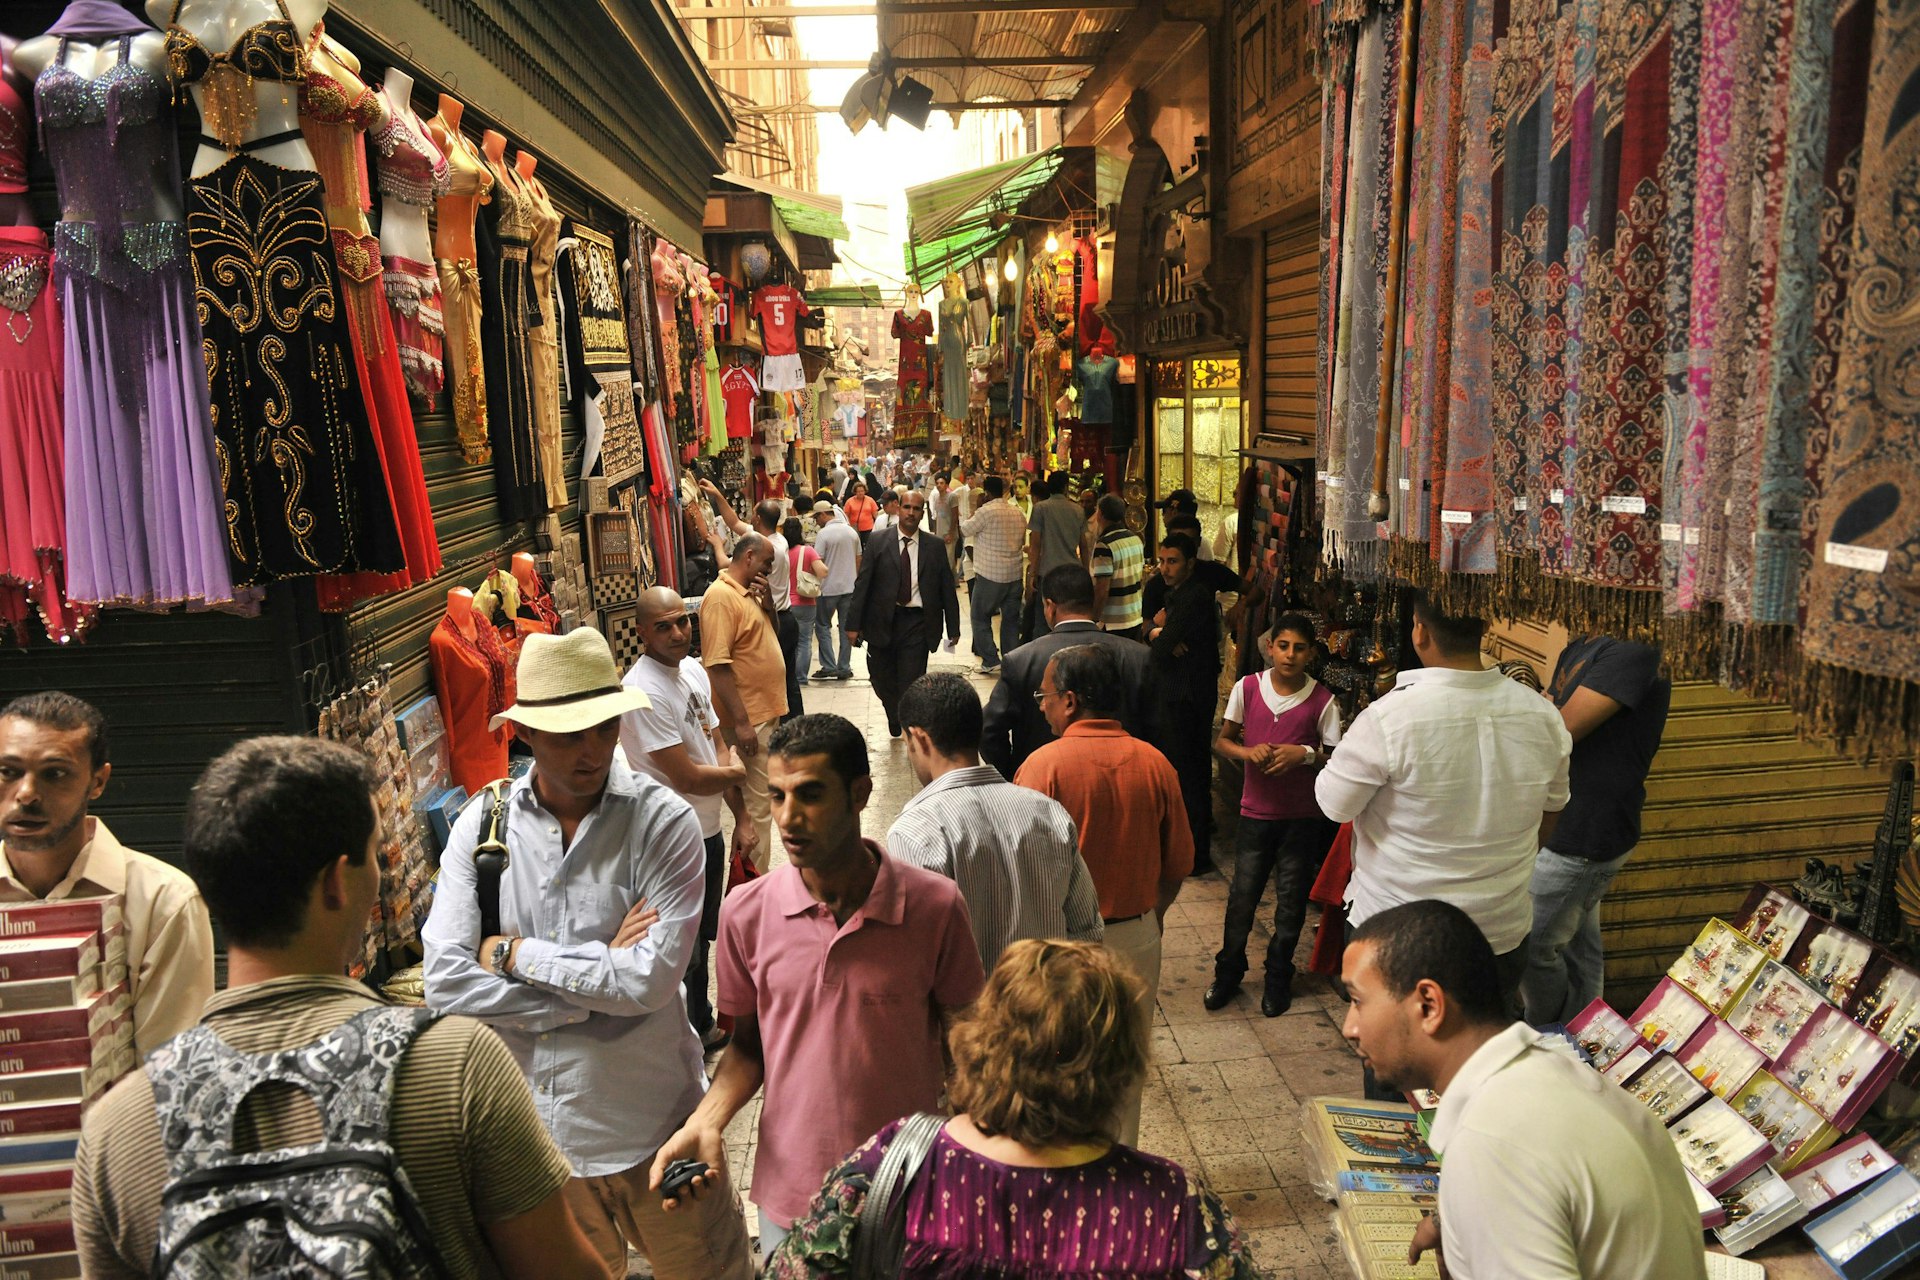 People shopping and trading in a market in Cairo, which is accessible via train when traveling around Egypt